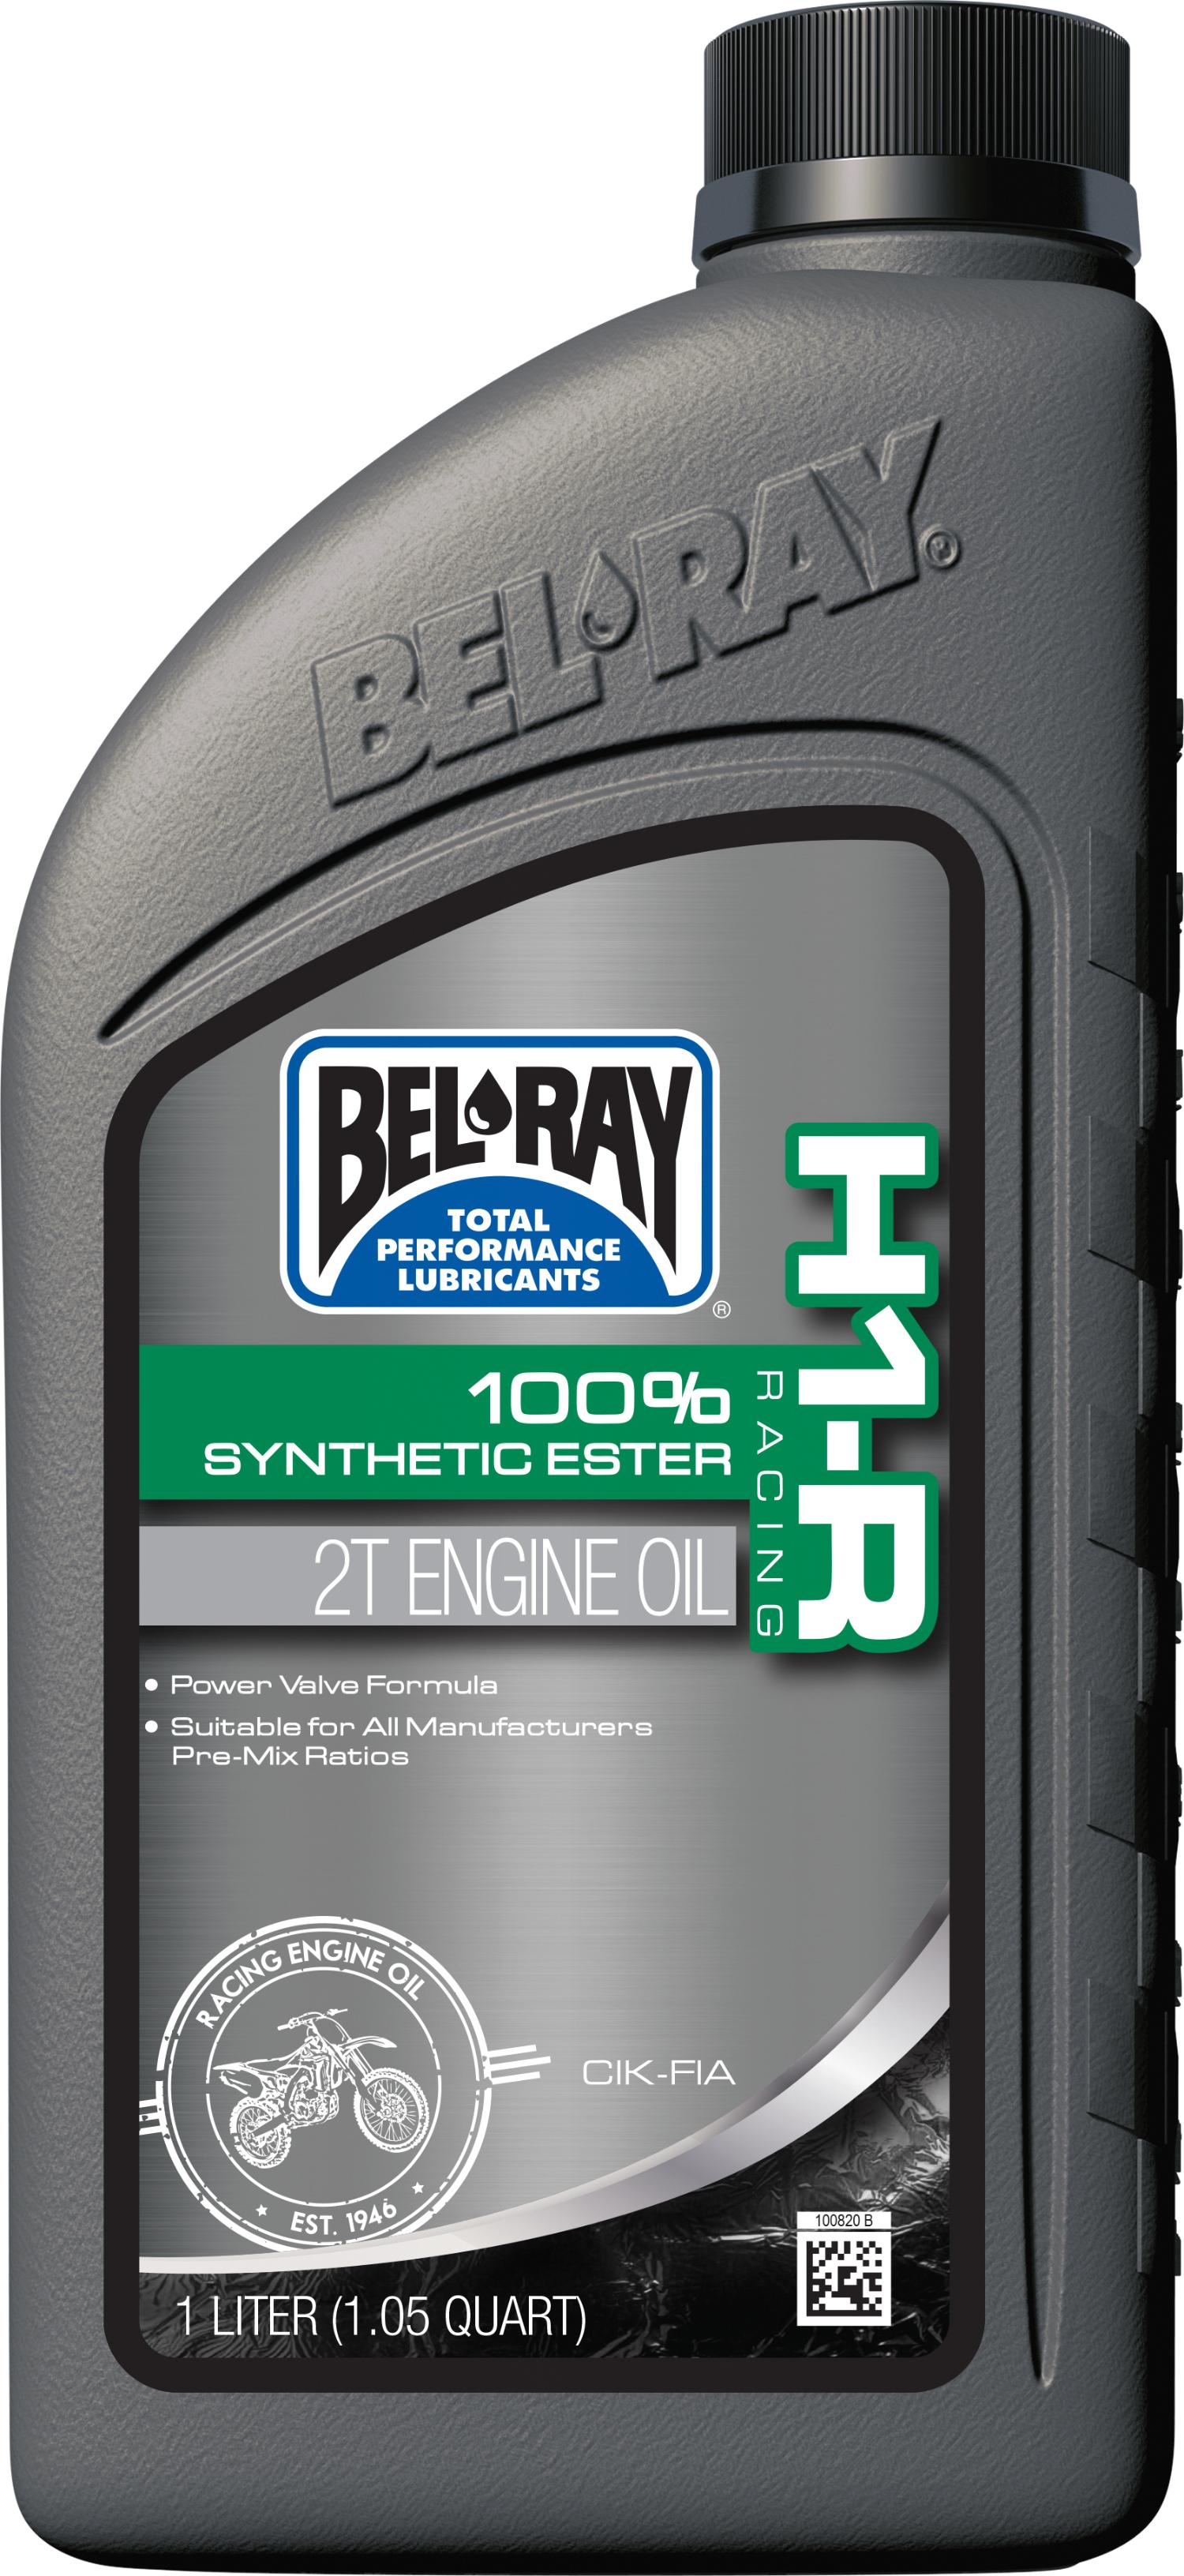 Bel-ray - H1-r 100% Synthetic Ester 2t Engine Oil 1l - 99280-B1LW